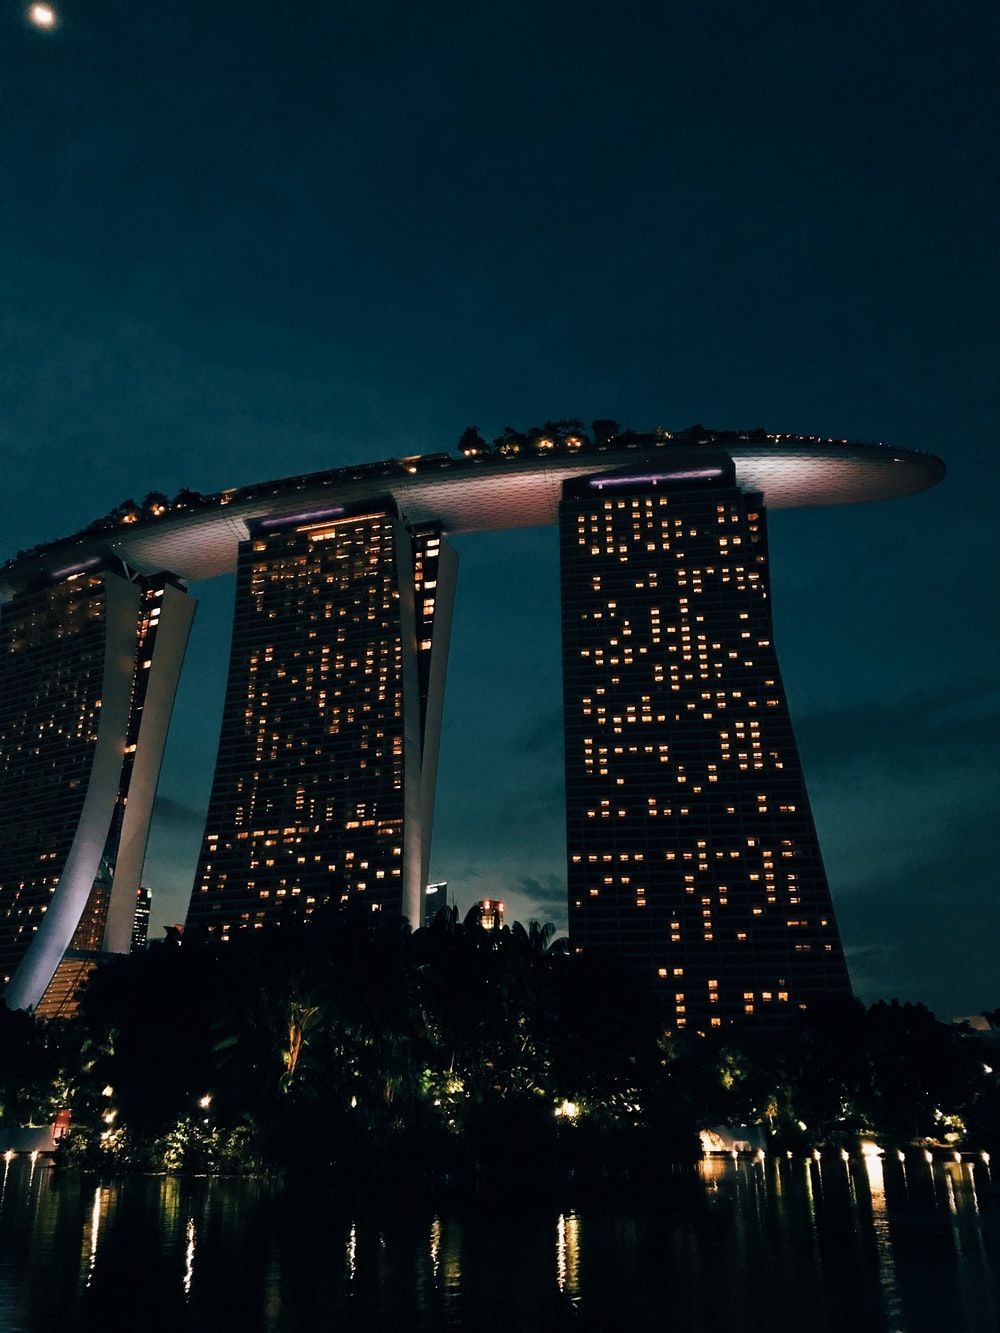 Marina Bay Sands Hotel Picture. Download Free Image